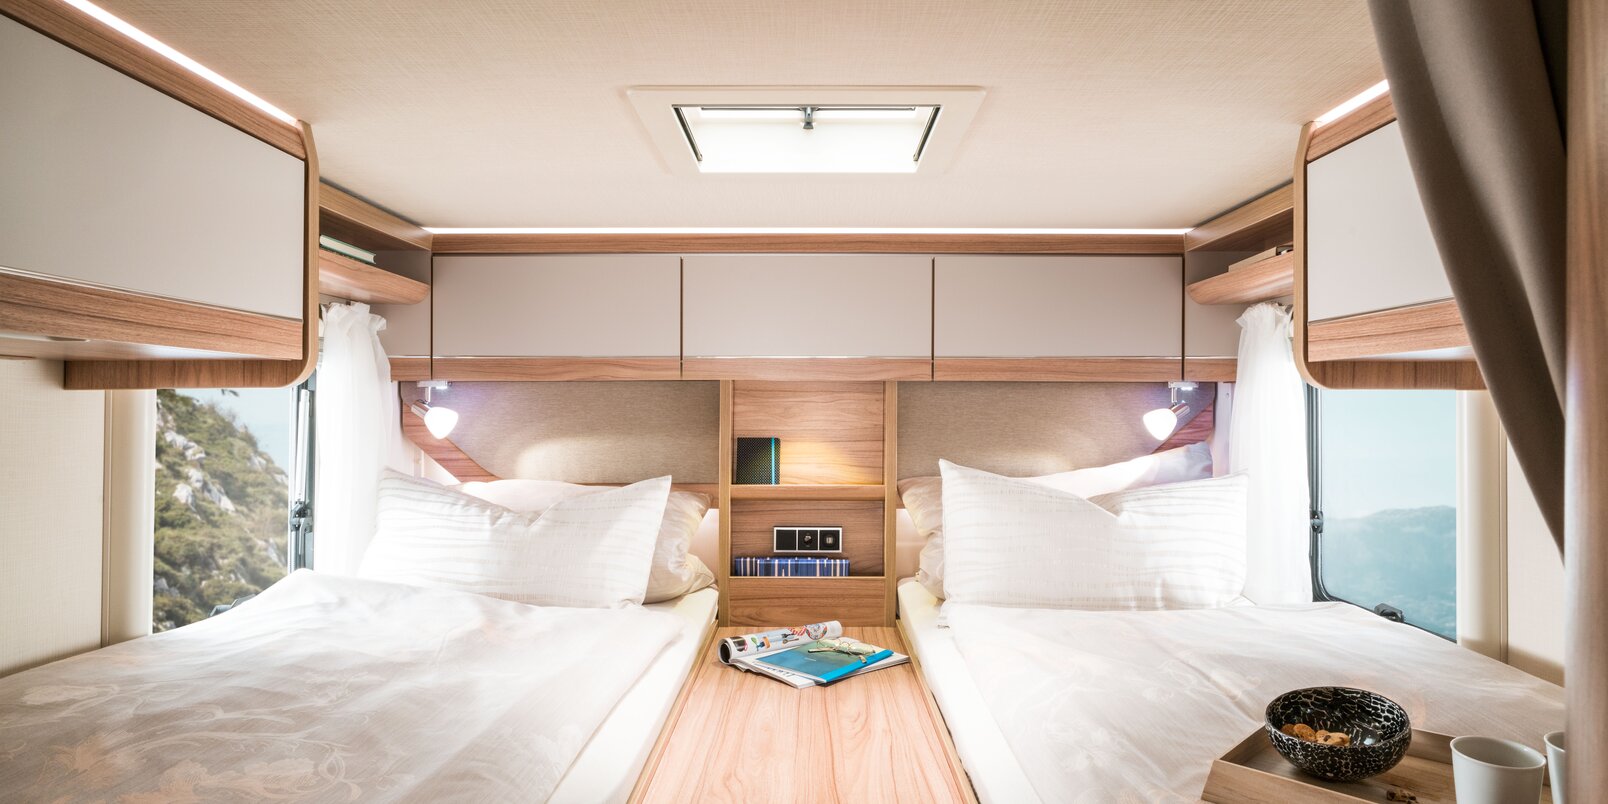 Sleeping area in the HYMER Exsist: made up lengthways single beds, central storage, overhead storage cupboards in the rear, lighting